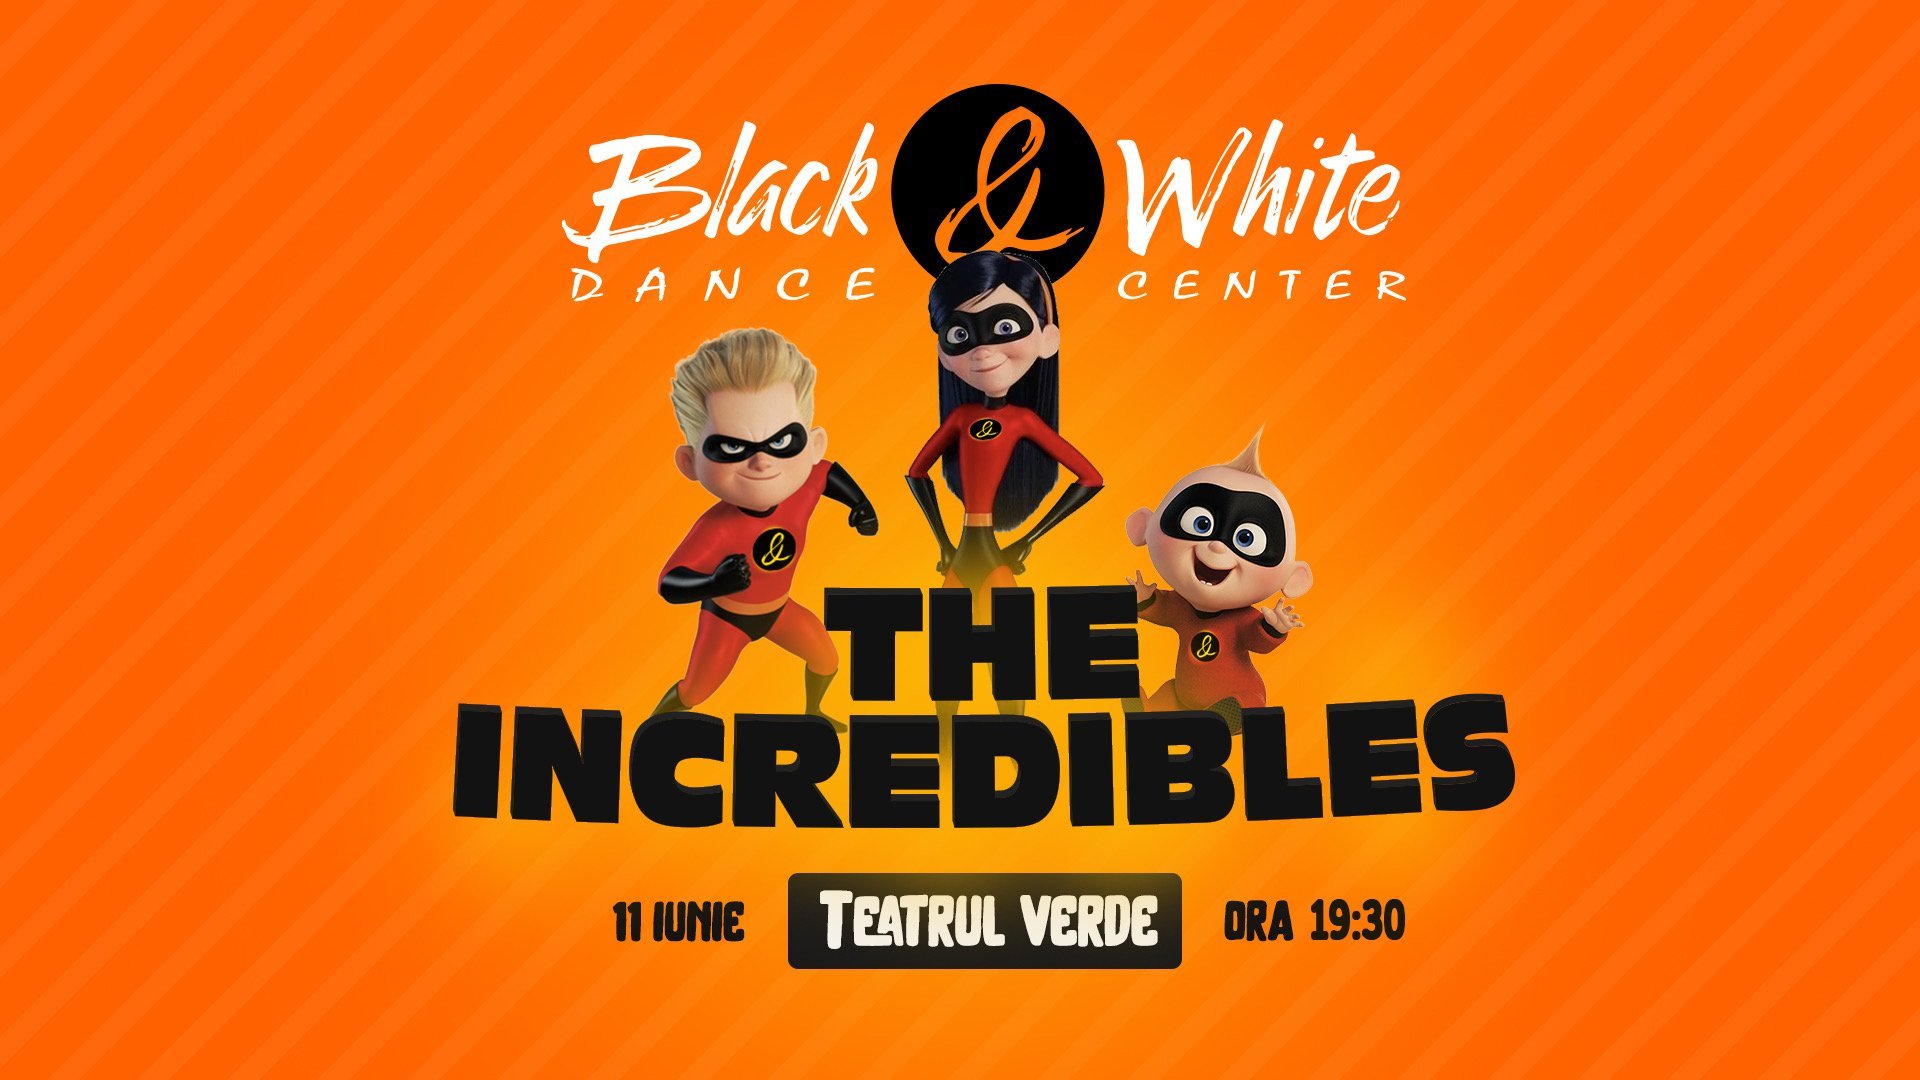 Black & WHITE - The incredibles